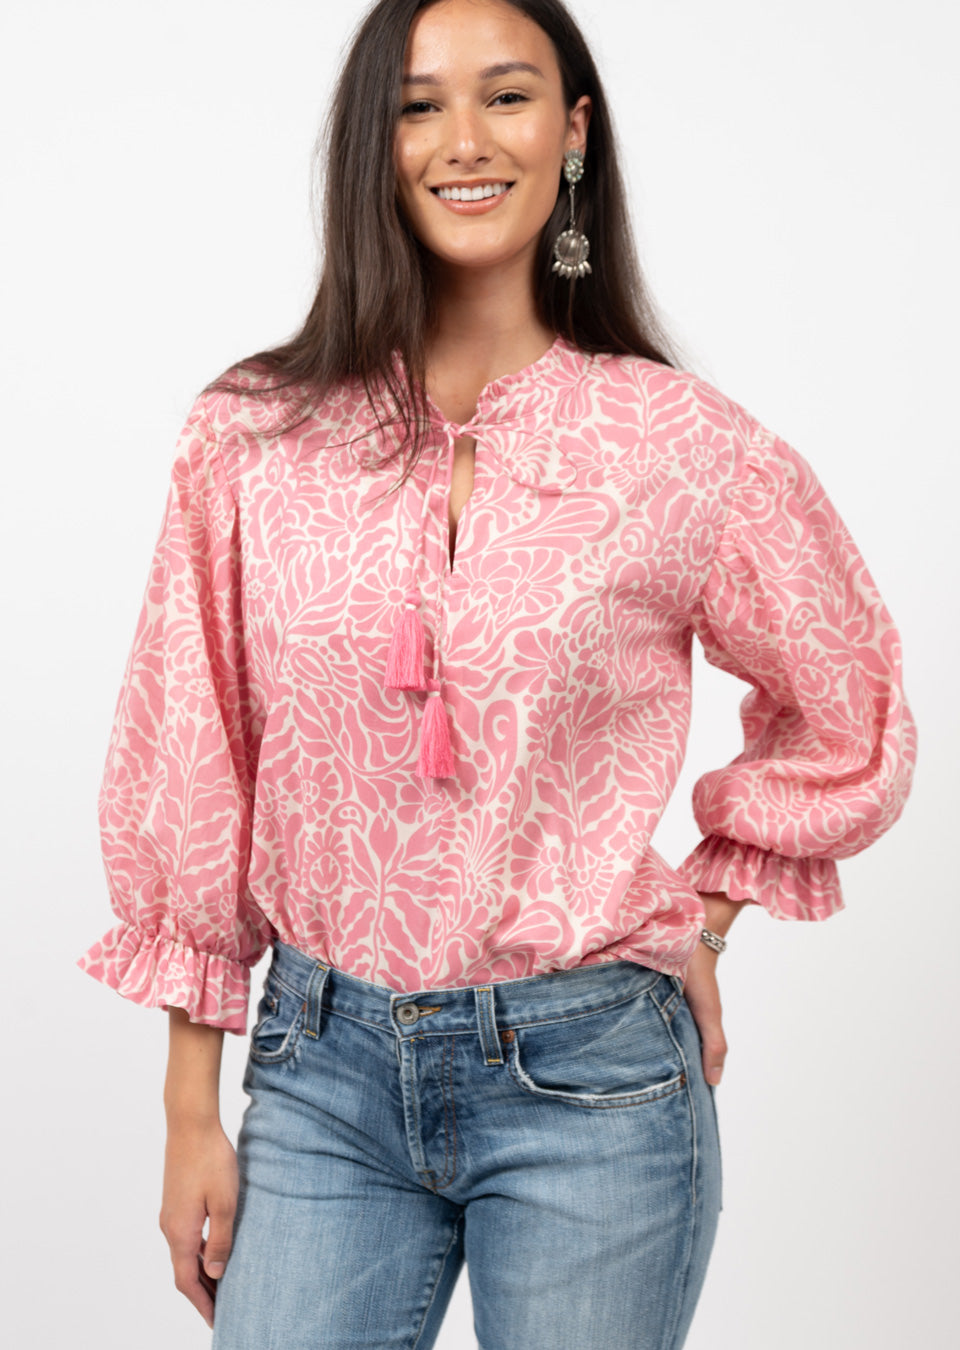 ivy jane balloon sleeve top in pink-front view 3